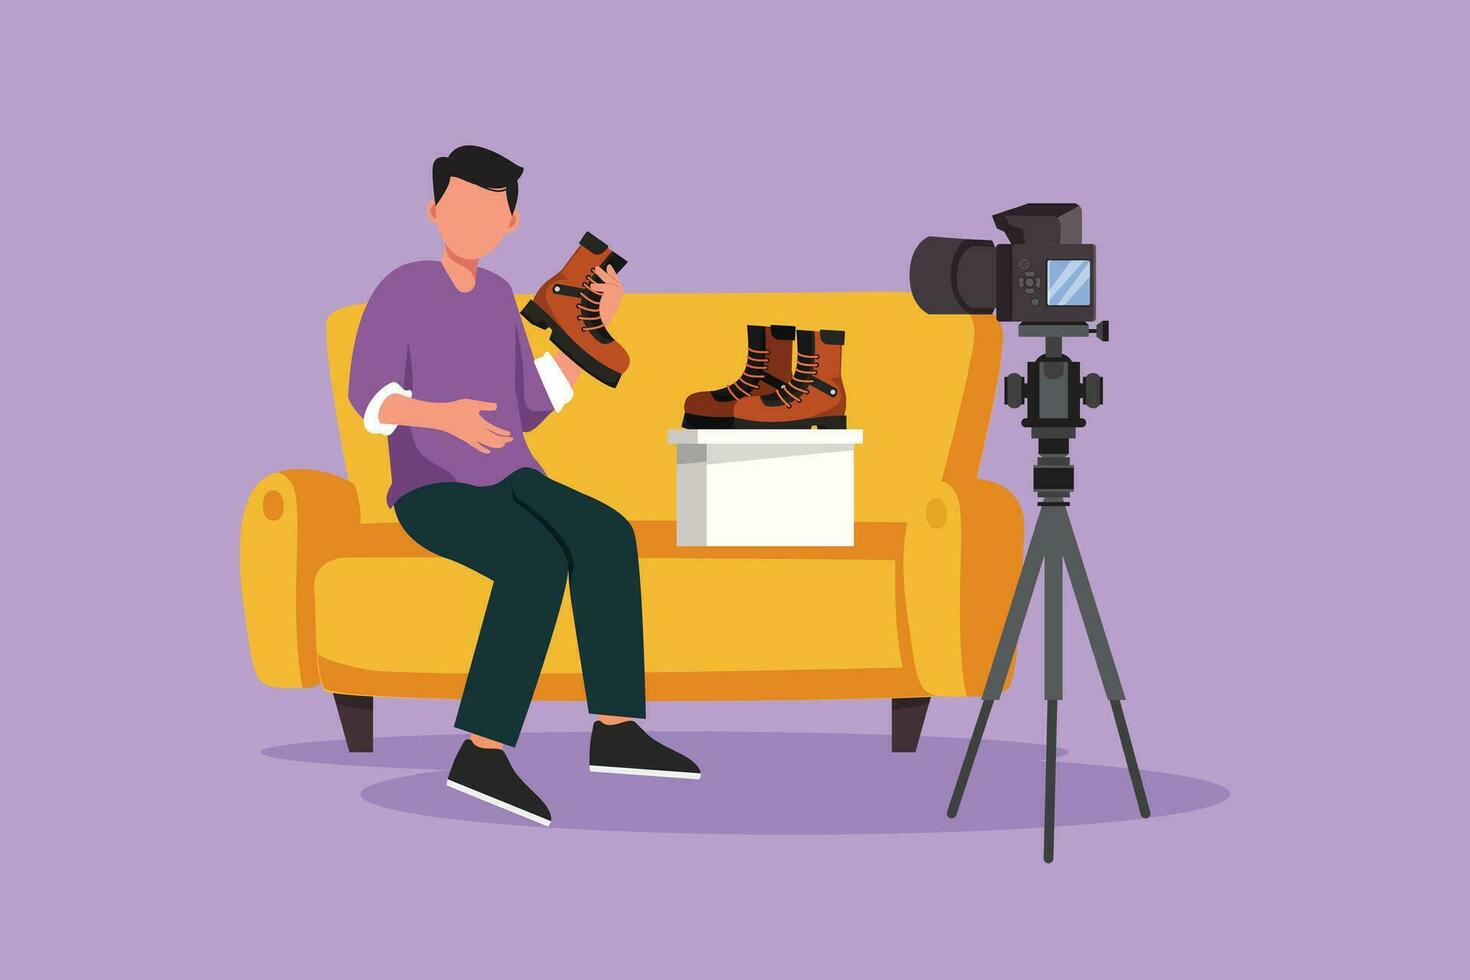 Graphic flat design drawing social media influencer reviewing boots. Smiling young man vlogging about men's sports shoe and filming himself at home on a video camera. Cartoon style vector illustration